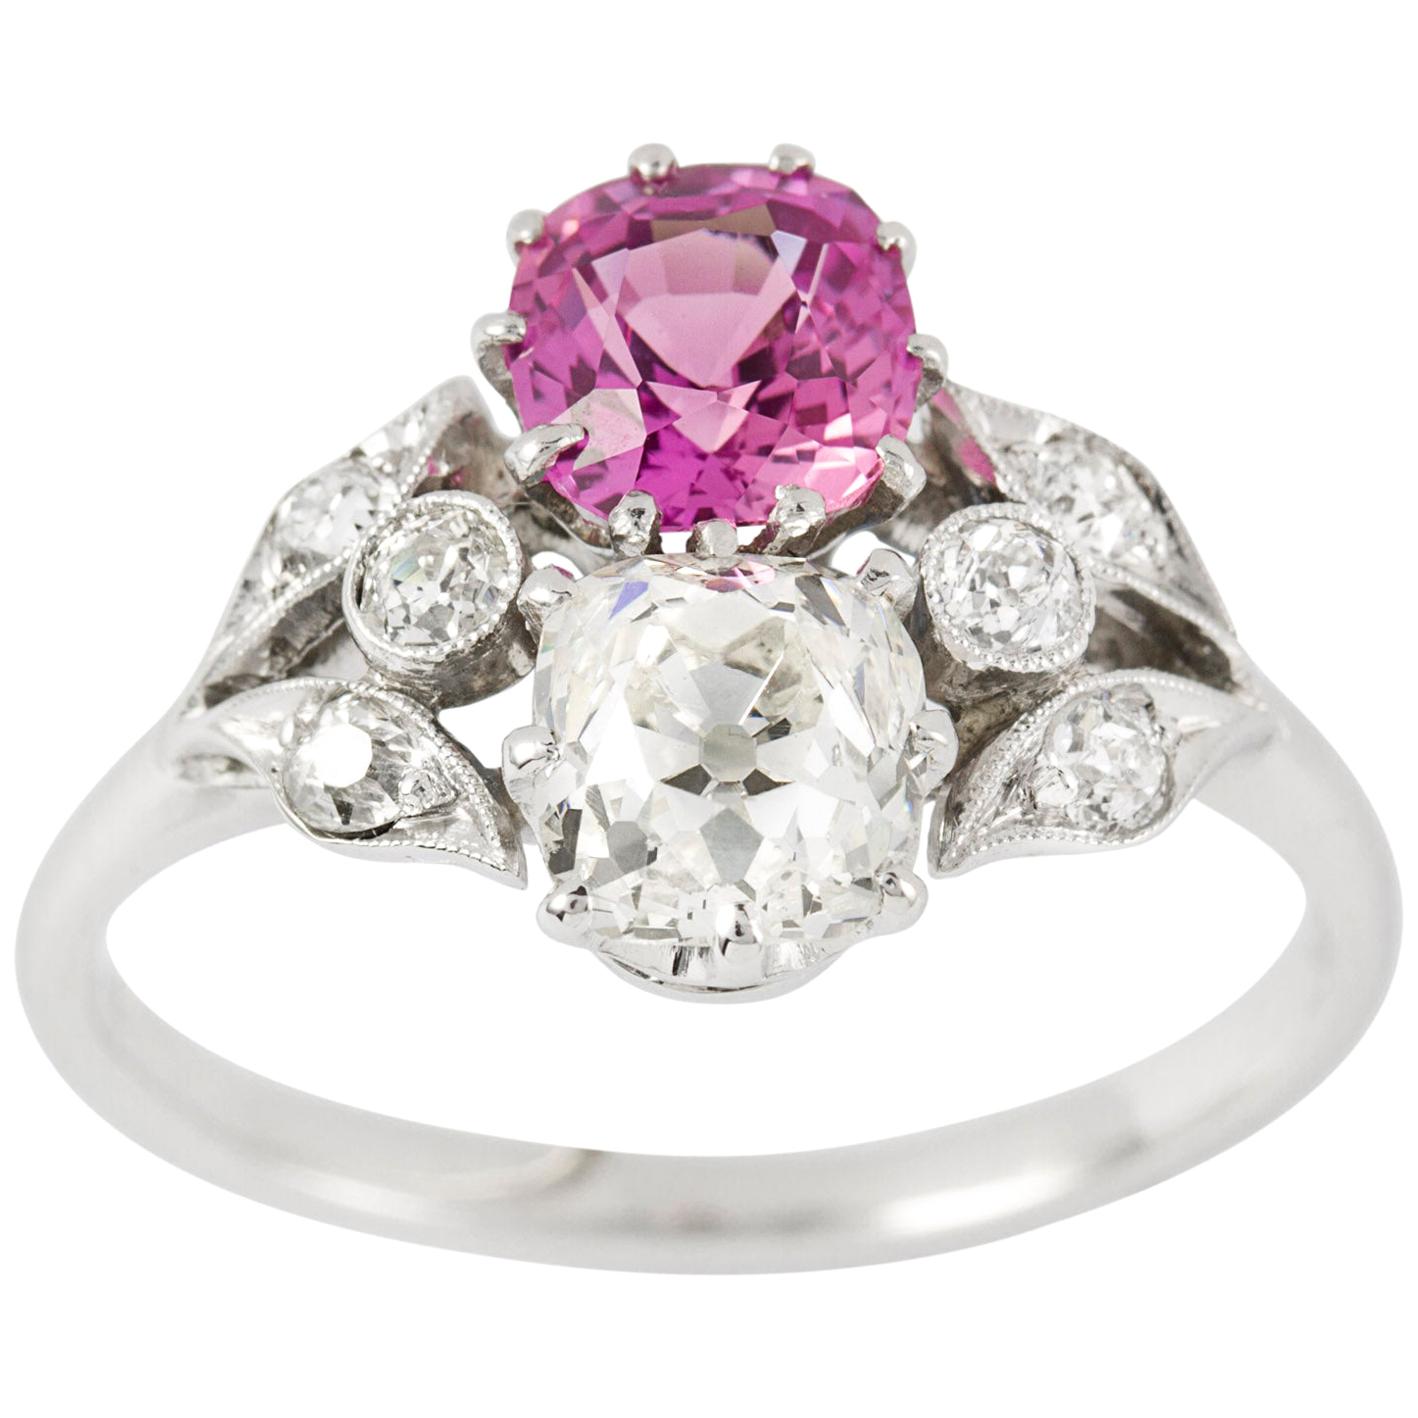 Early 20th Century Diamond and Pink Sapphire Ring